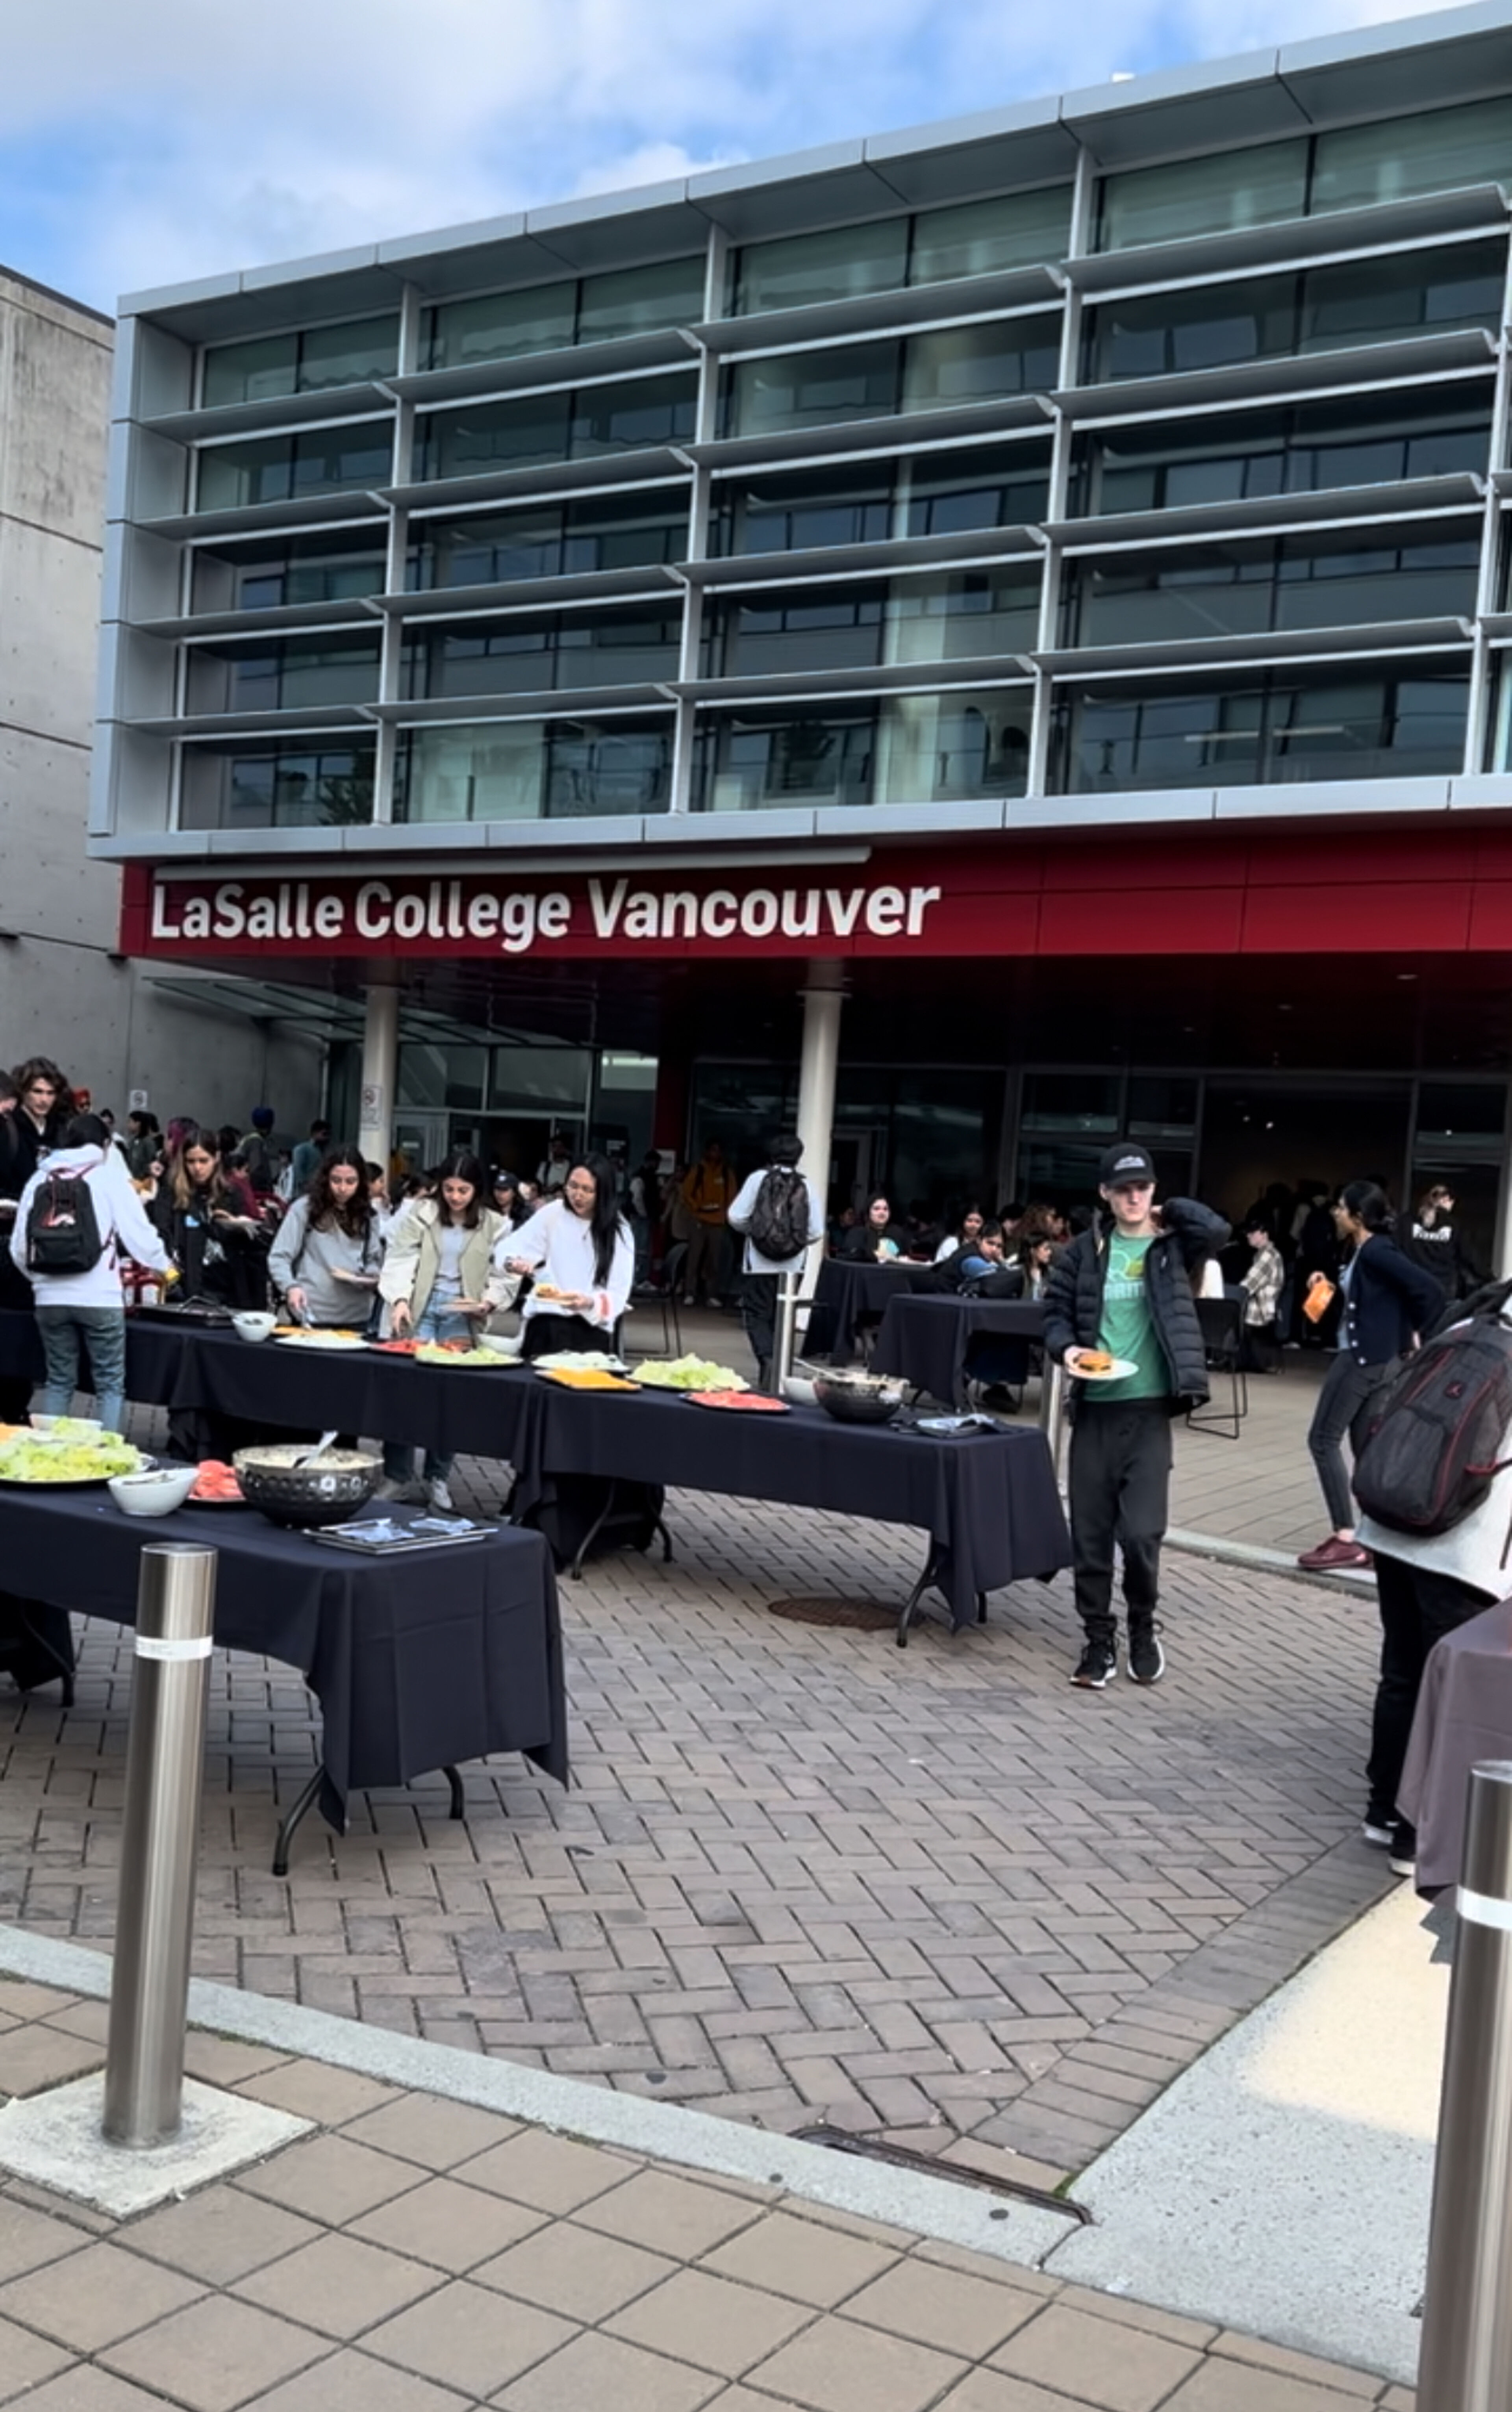 Students gather for an event outside LaSalle College Vancouver, with food served at multiple tables under an overcast sky.